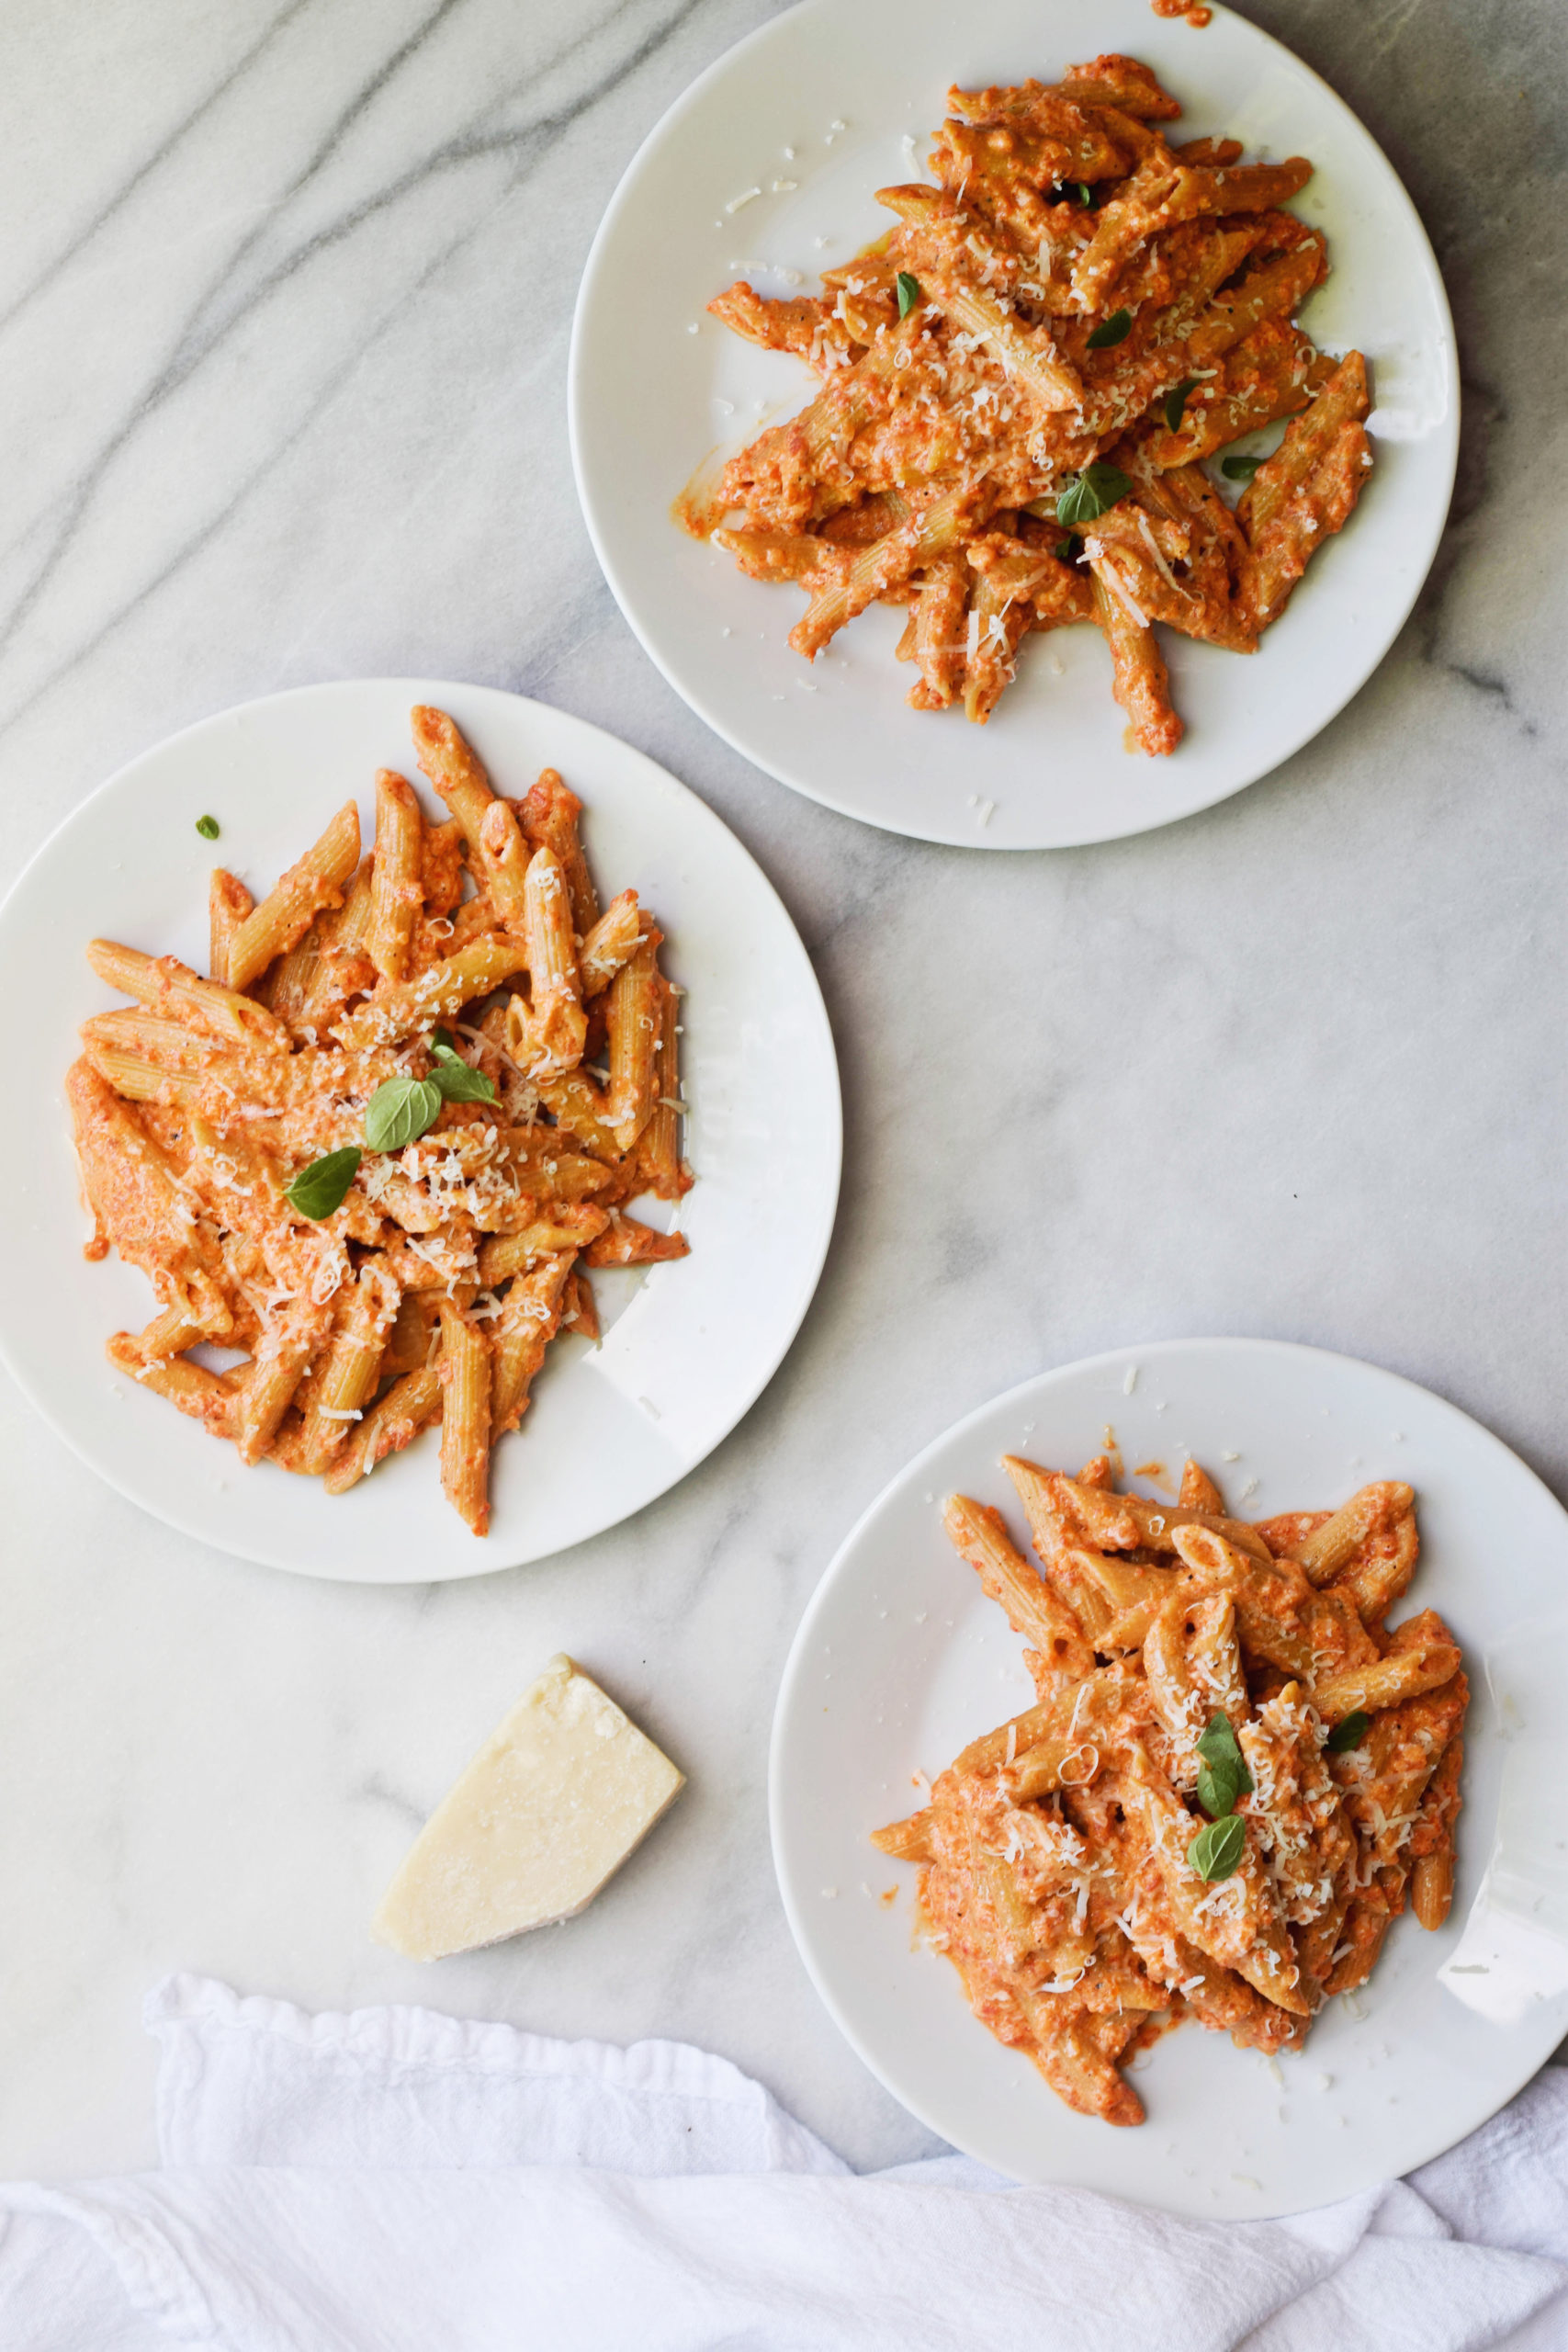 (Lightened Up!) Red Pepper & Goat Cheese Pasta